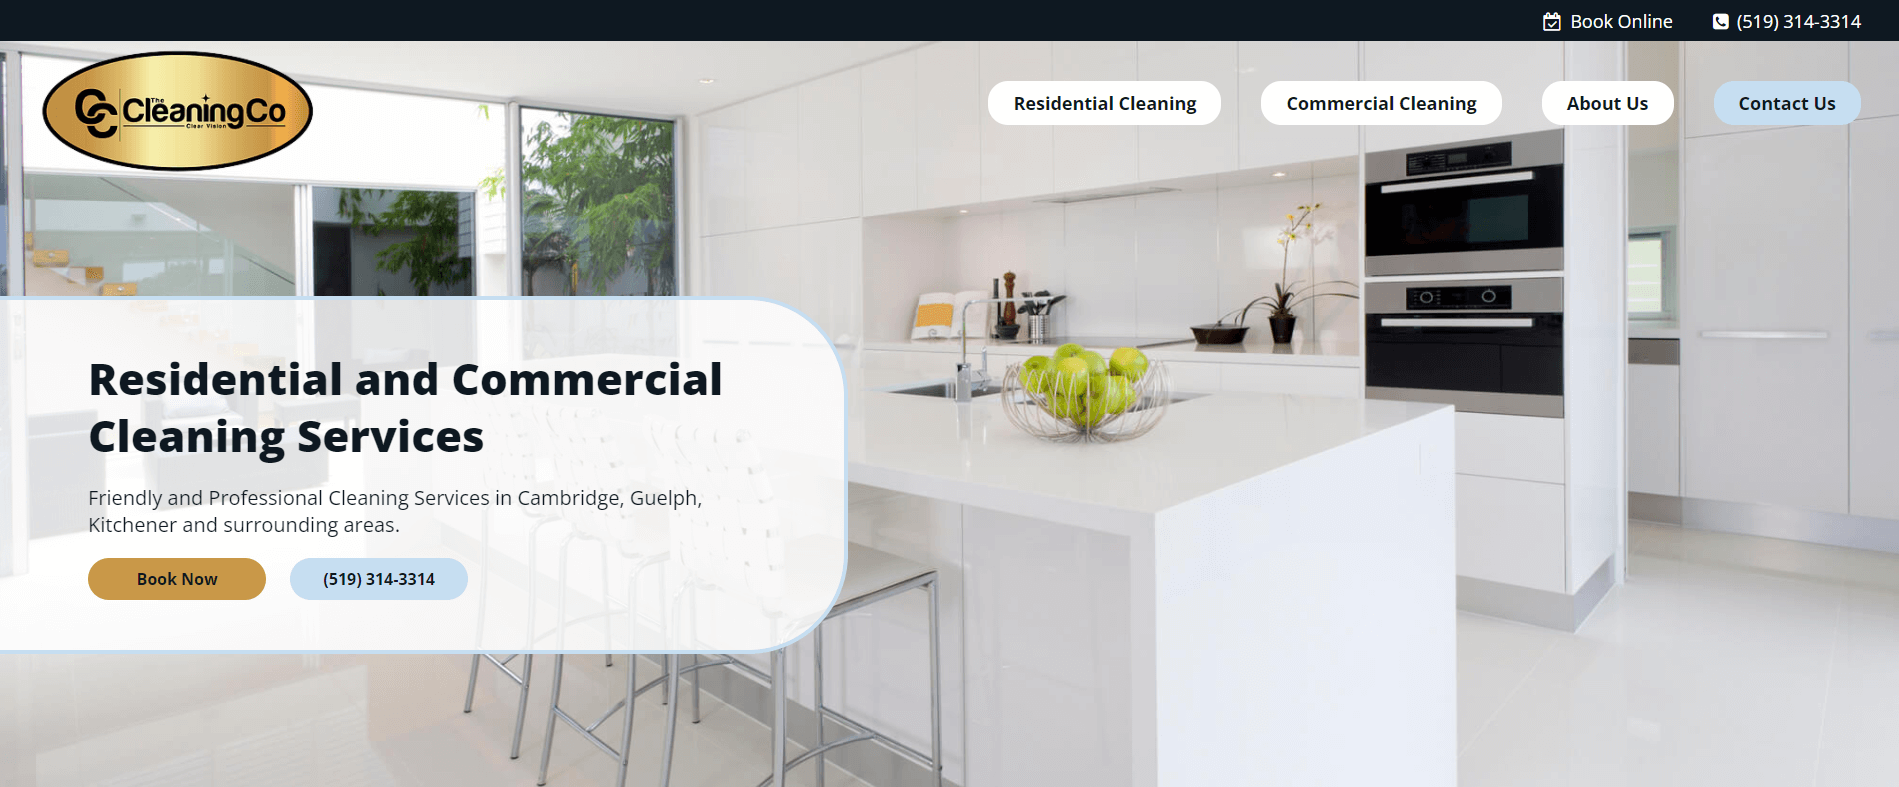 Screenshot of The Cleaning Co website home page